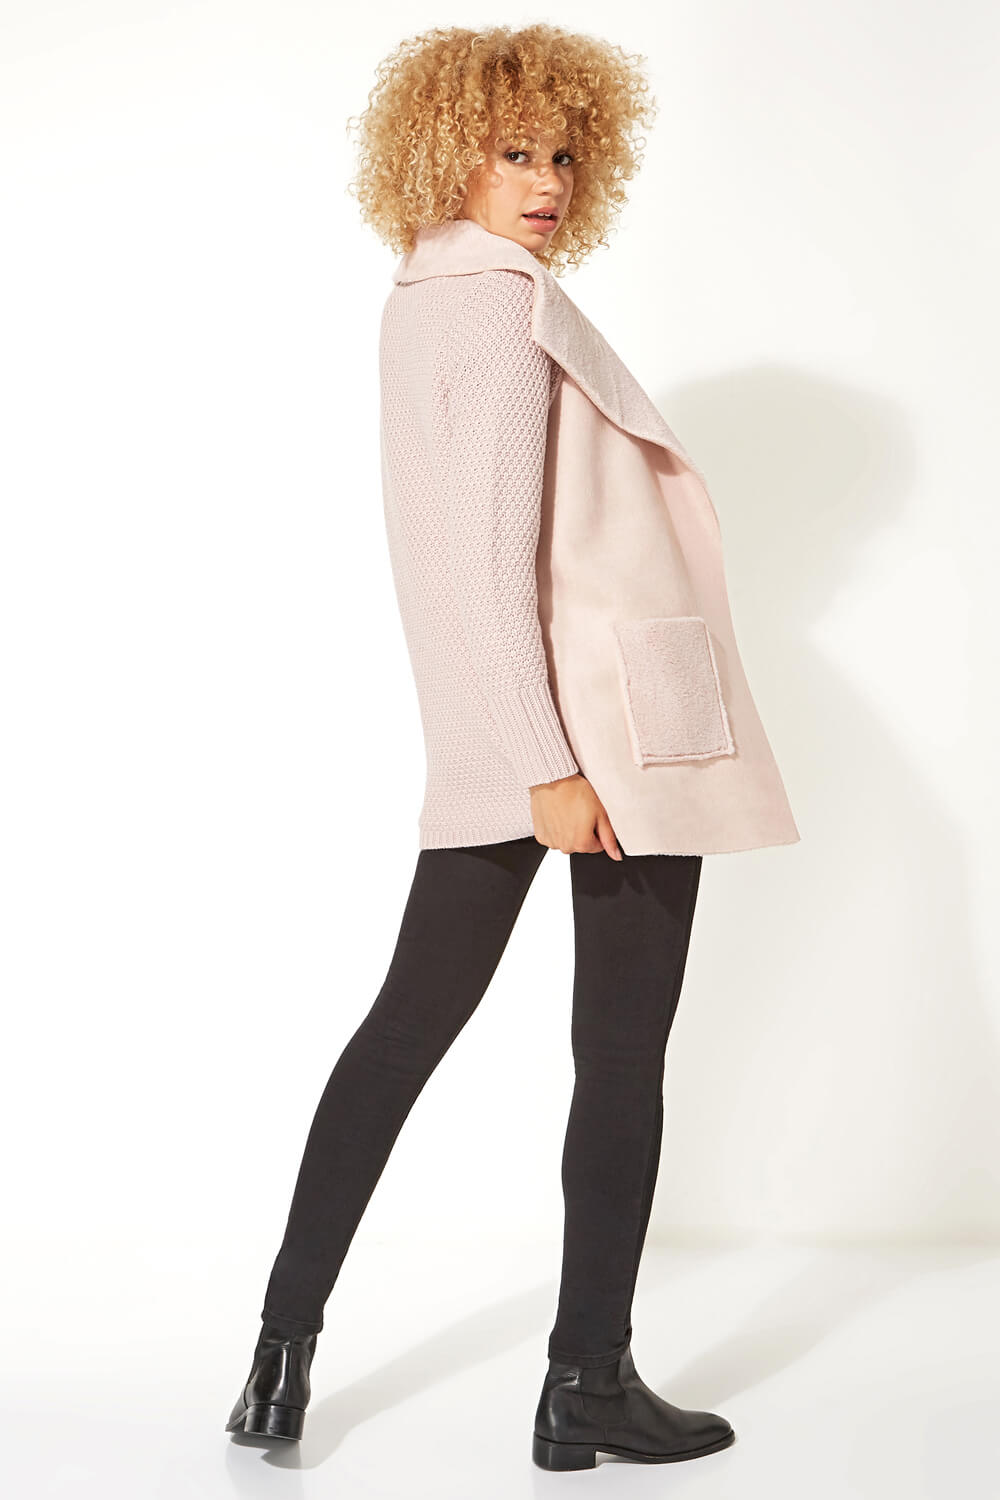 PINK Faux Shearling Patch Pocket Cardigan, Image 3 of 5